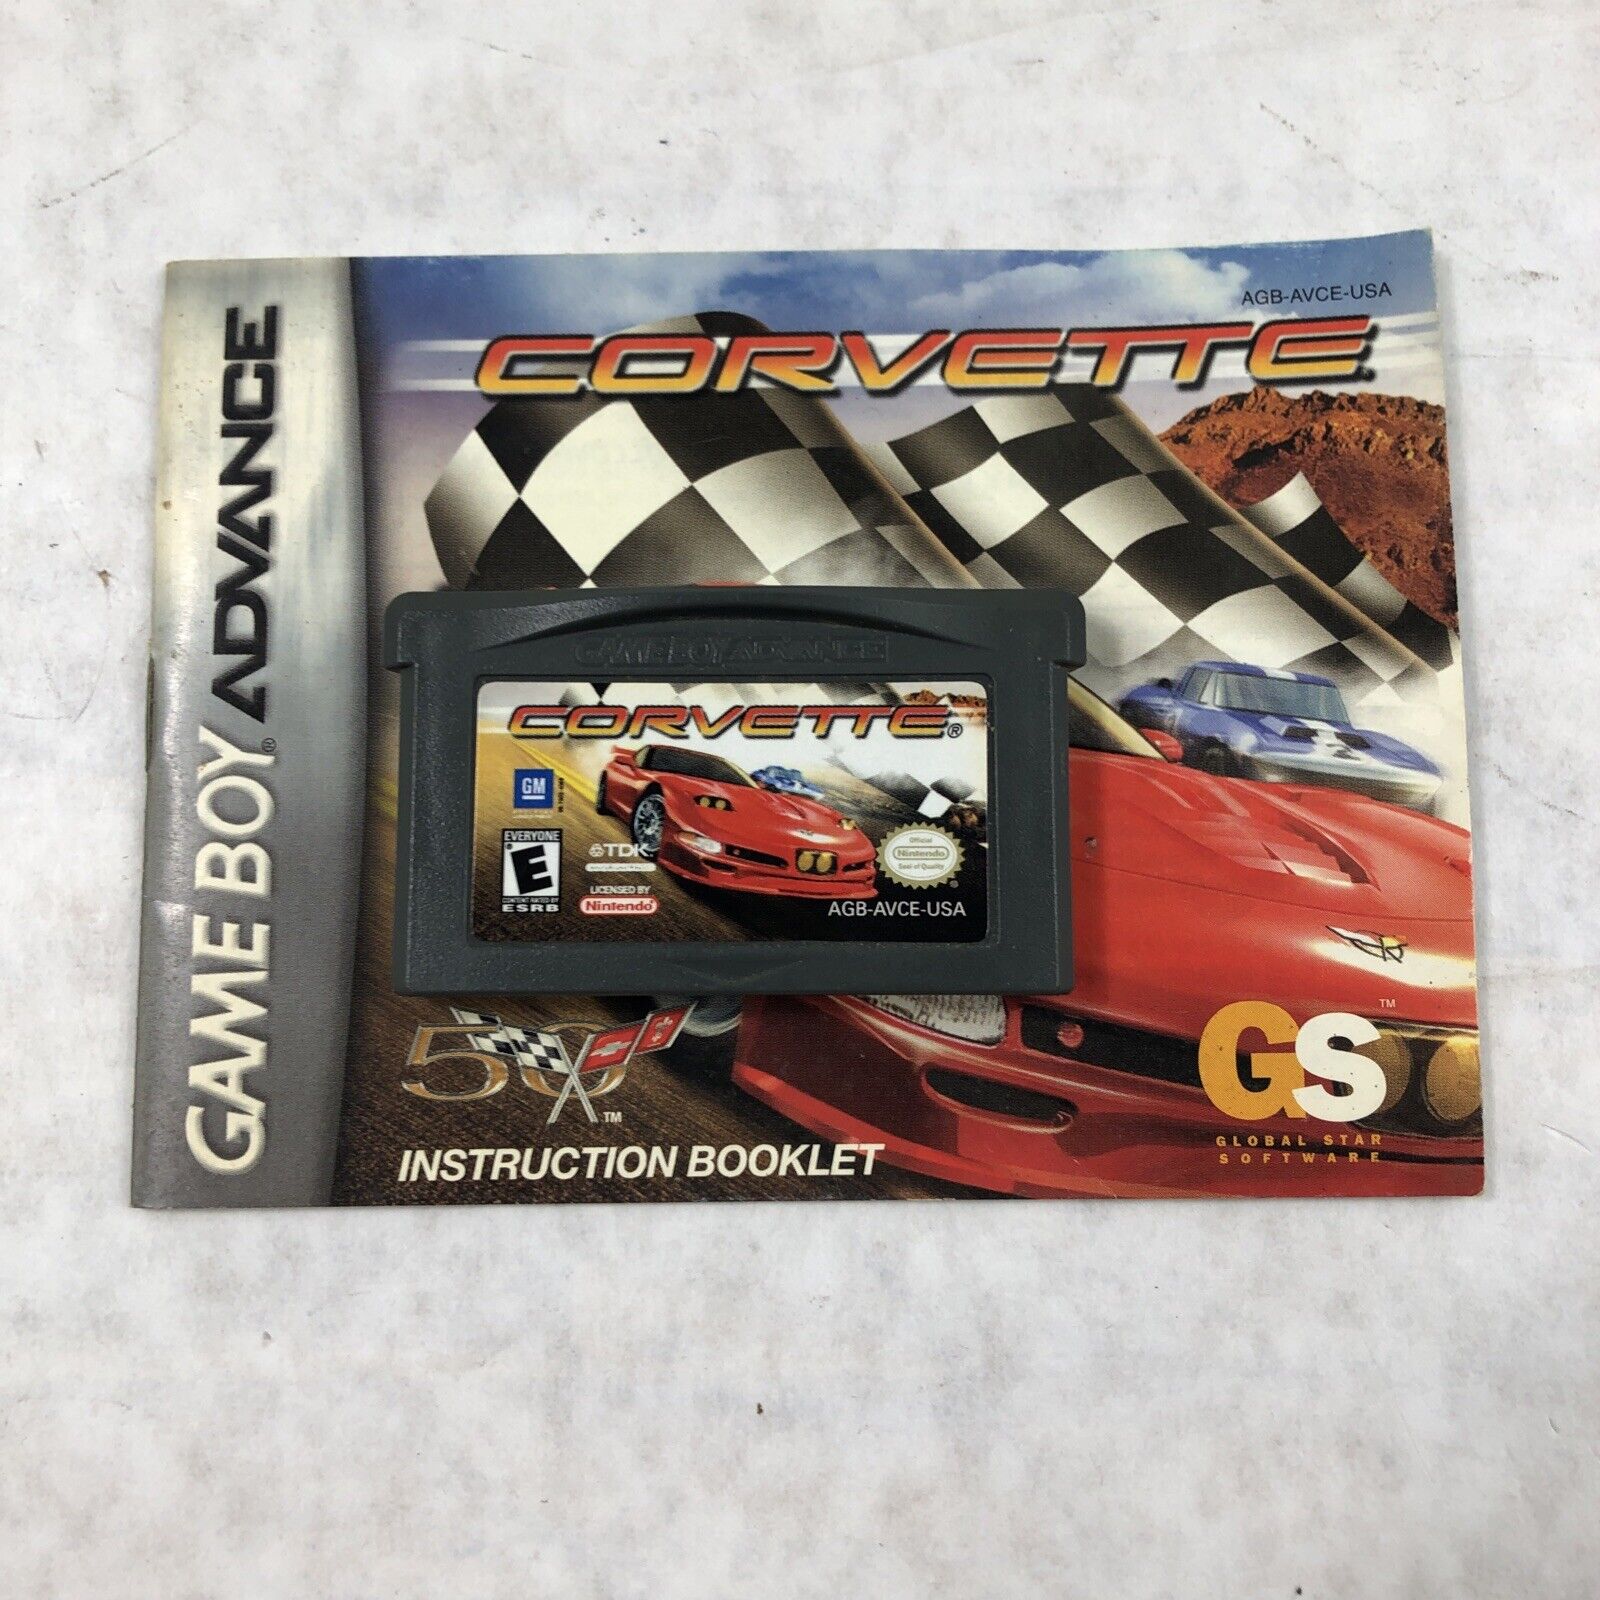 Gameboy Advance Corvette Game and Instruction Booklet